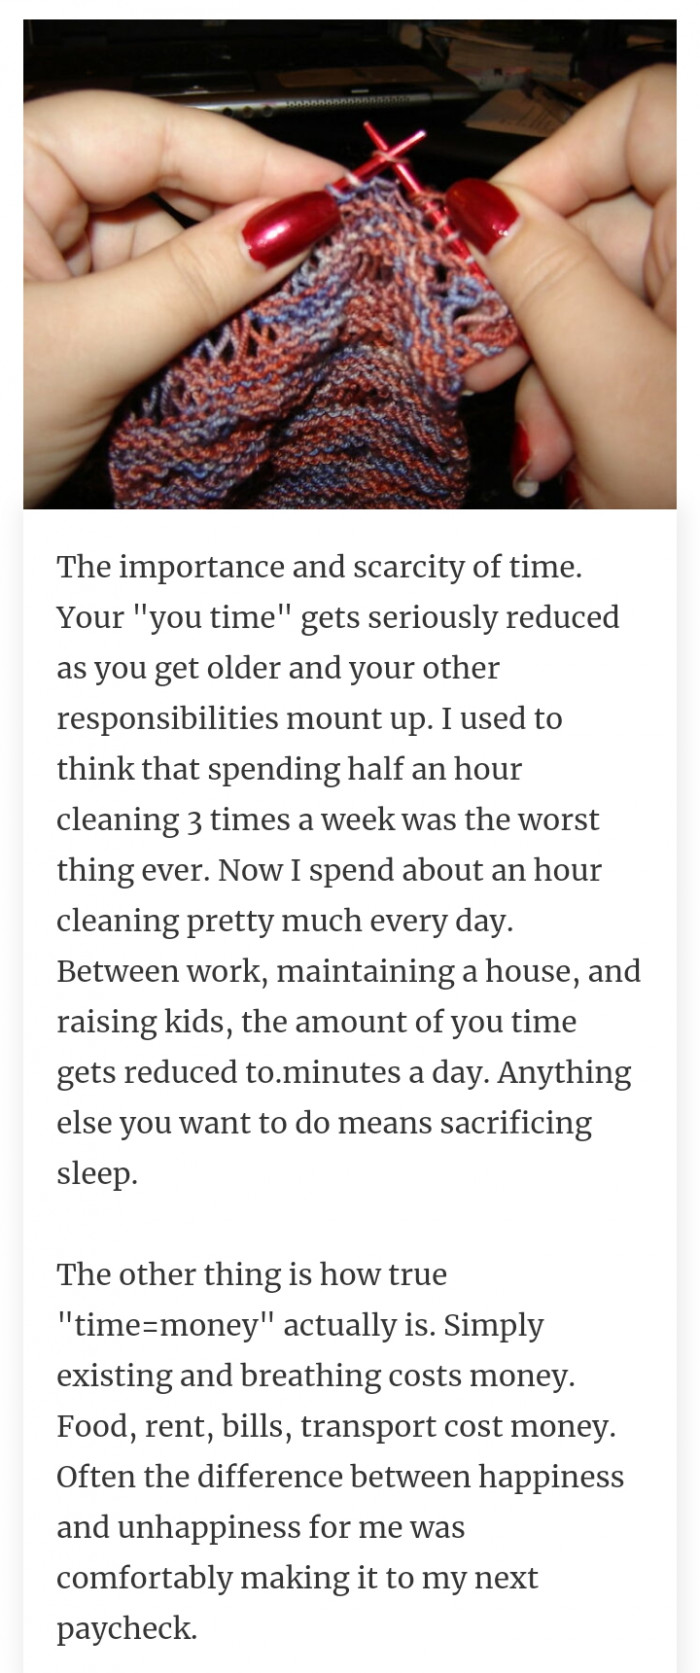 24. Scarcity of time for yourself.